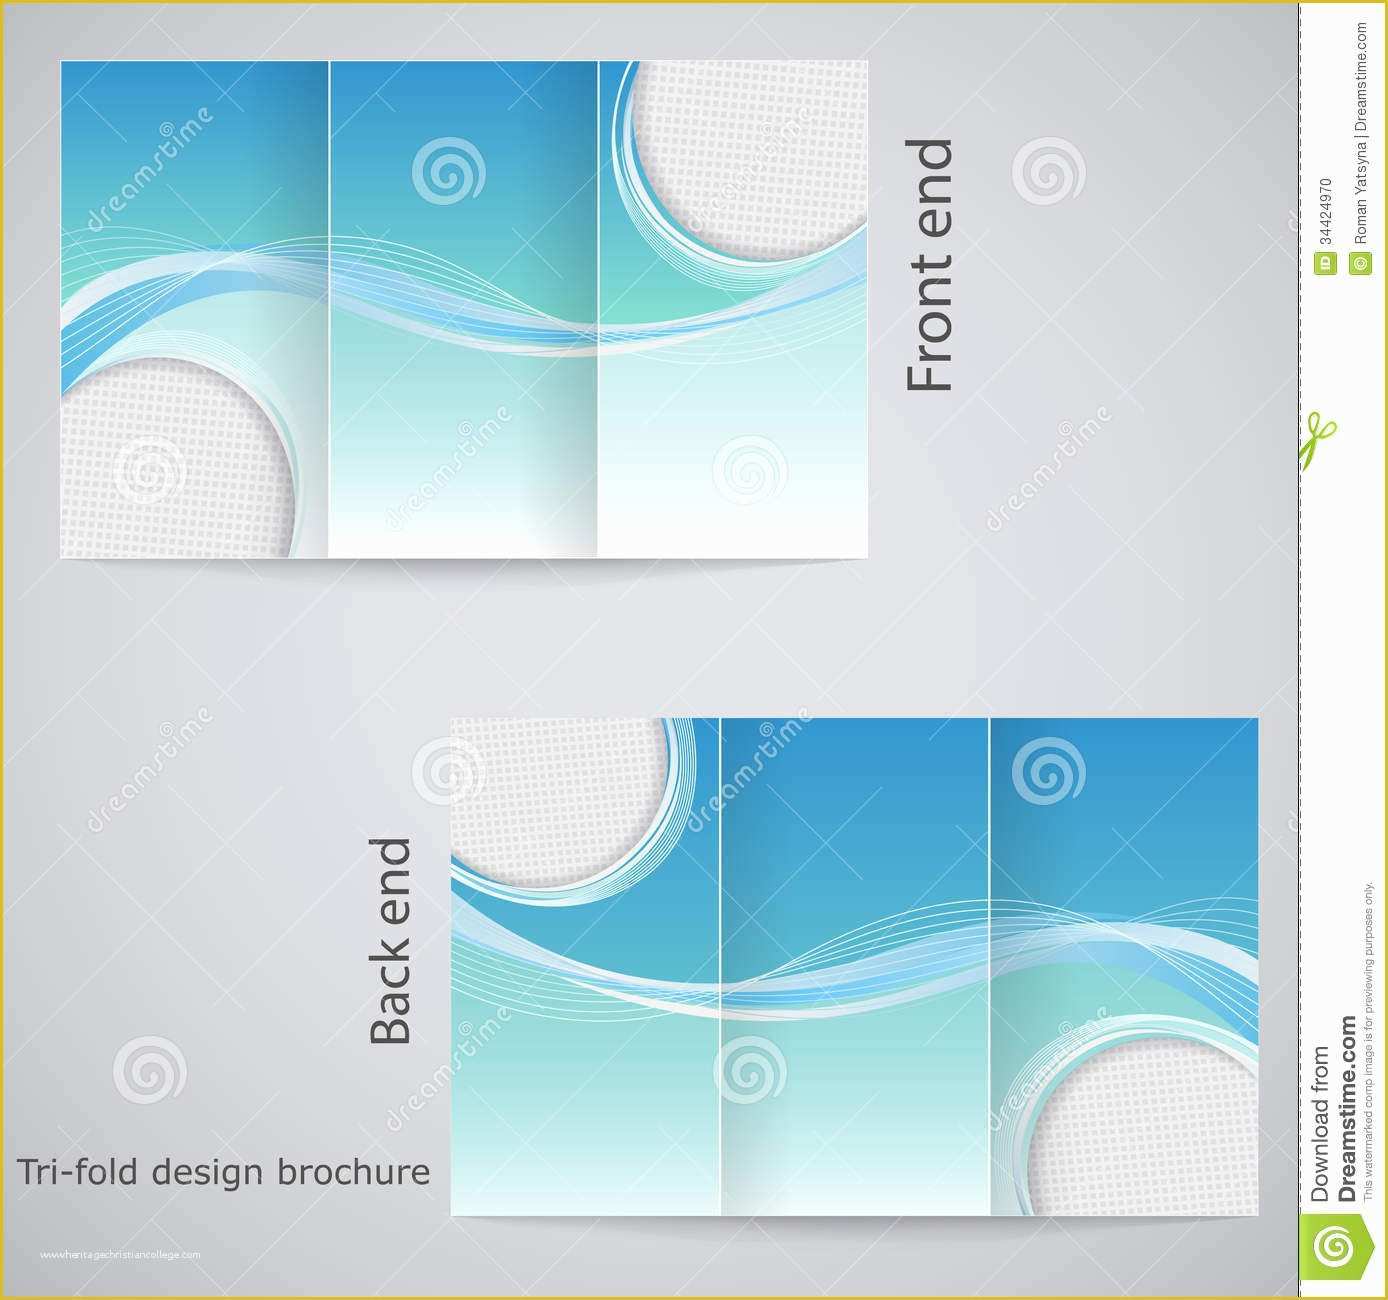 3 Fold Brochure Template Free Download Of Best S Of 3 Fold Brochure Templates Flyer Free Tri